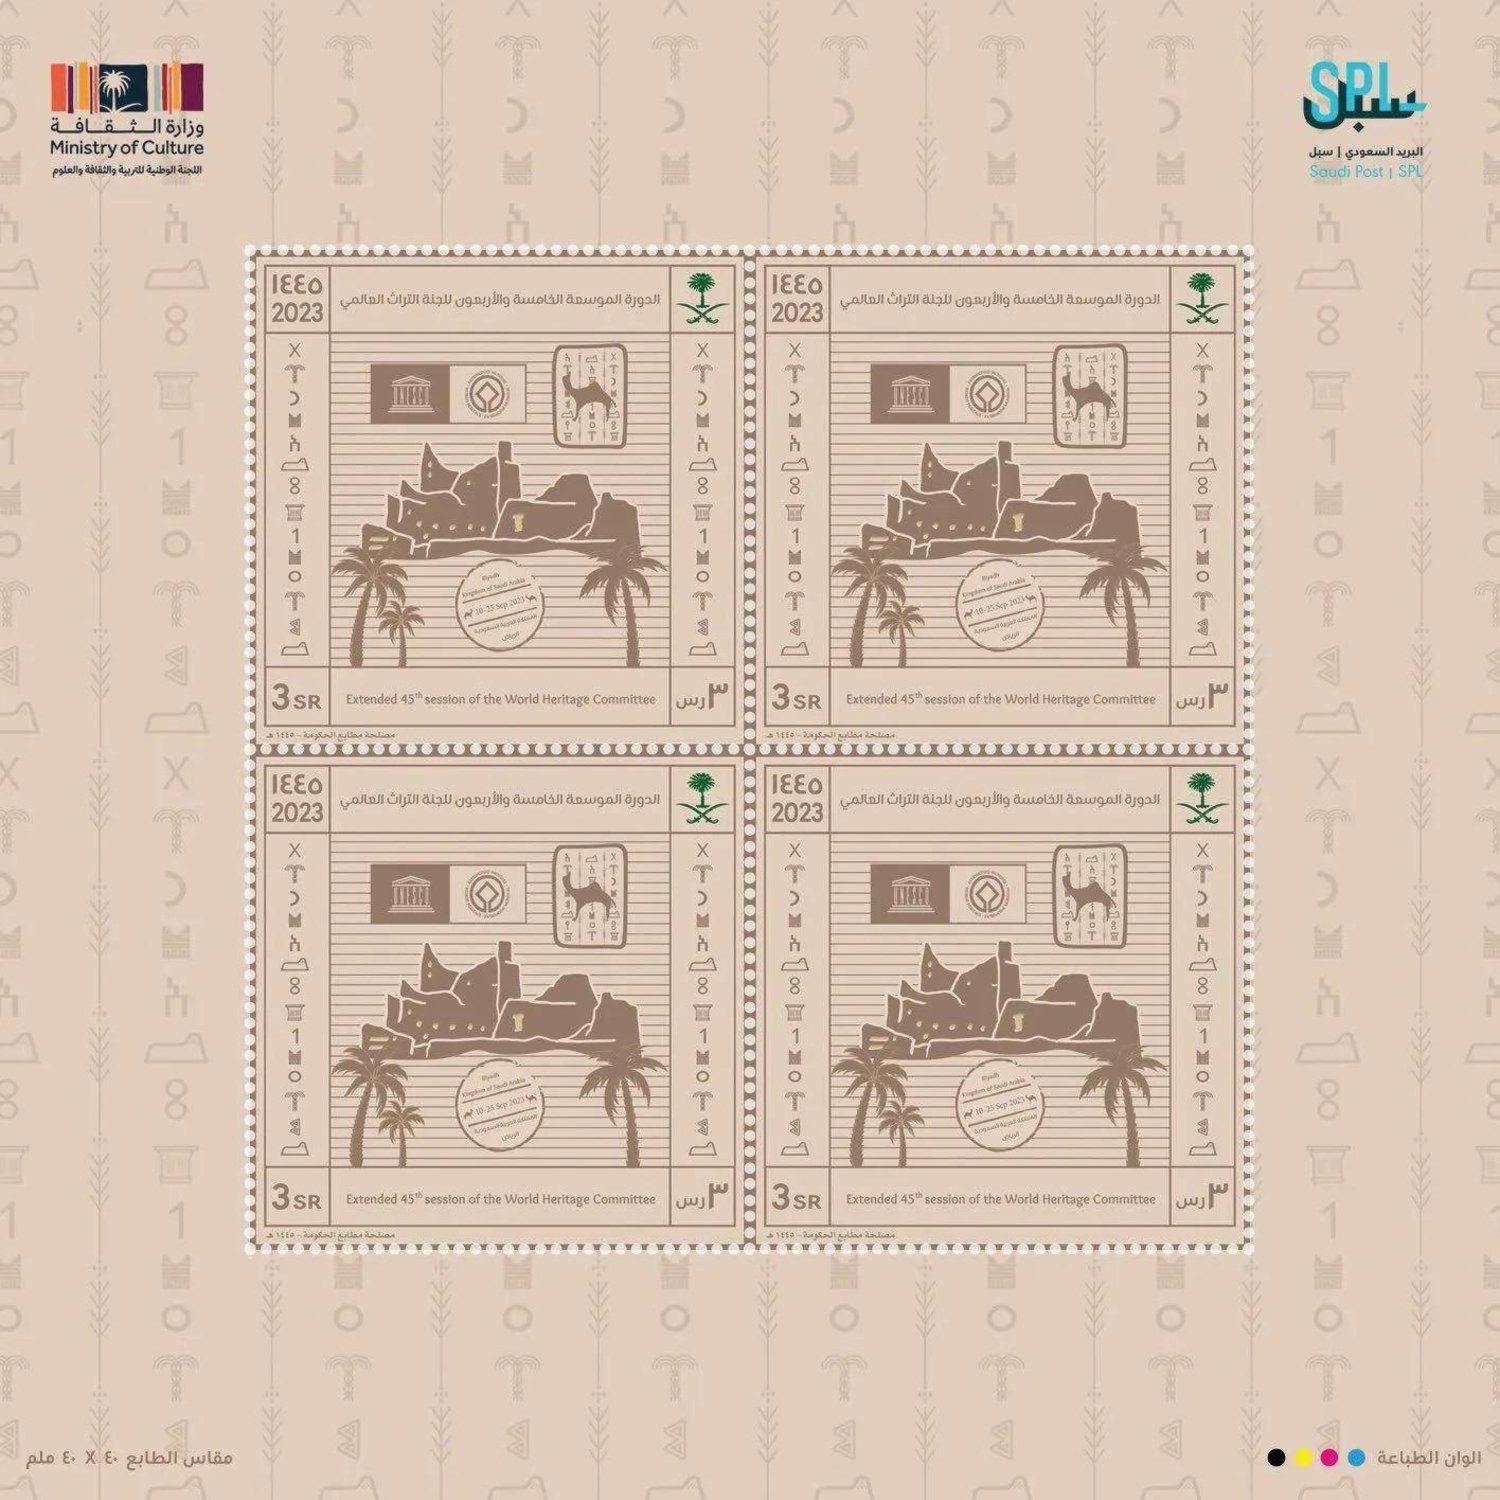 Saudi Post Issues Stamp to Commemorate 45th Session of UNESCO World Heritage Committee